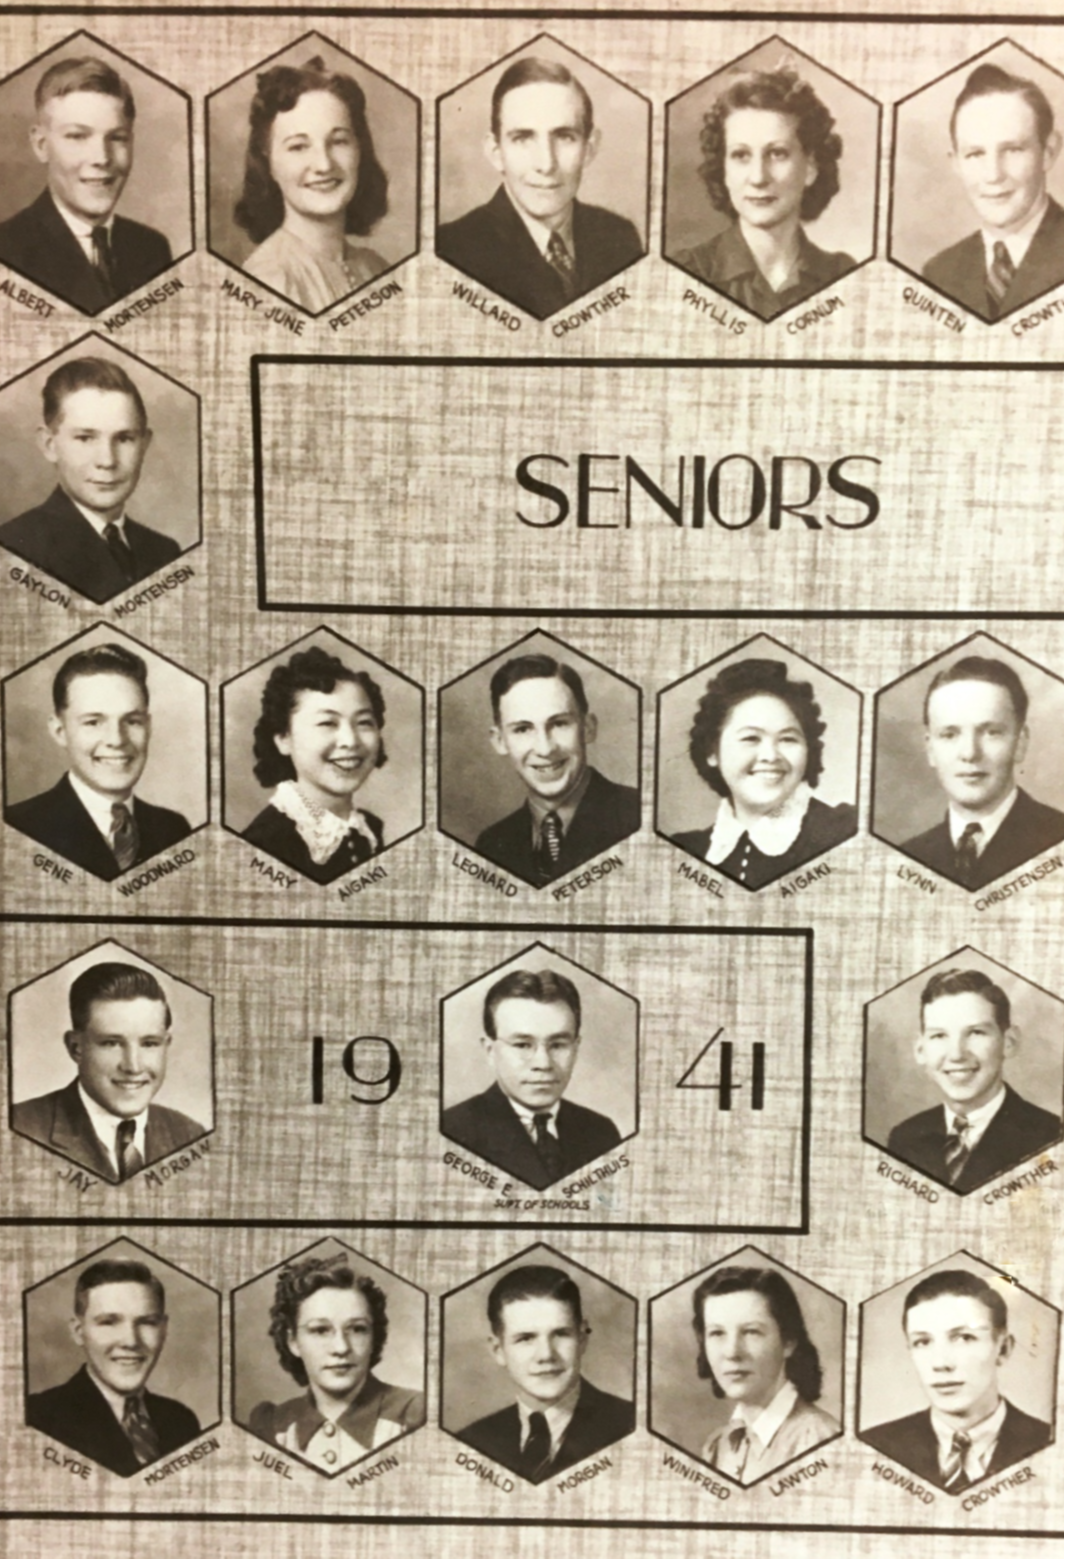 a photo of the seniors from the class of 1941